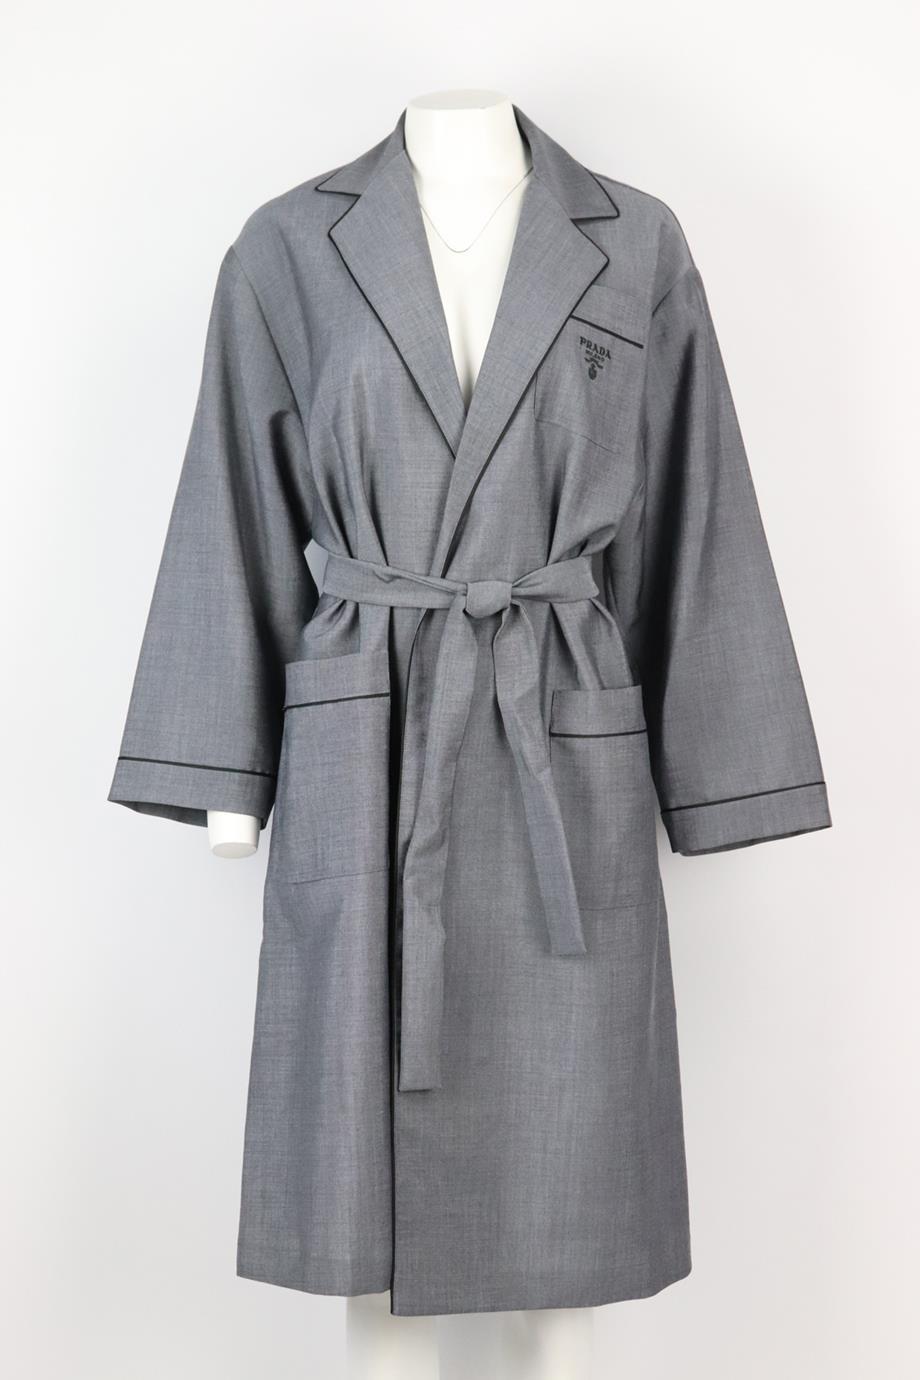 Prada belted logo embroidered wool blend robe. Grey. Long sleeve, v-neck. Belt fastening at front. 60% Mohair, 40% wool; lining: 100% viscose. Size: XSmall (UK 6, US 2, FR 34, IT 38). Shoulder to shoulder: 19.5 in. Bust: 44 in. Waist: 43 in. Hips: